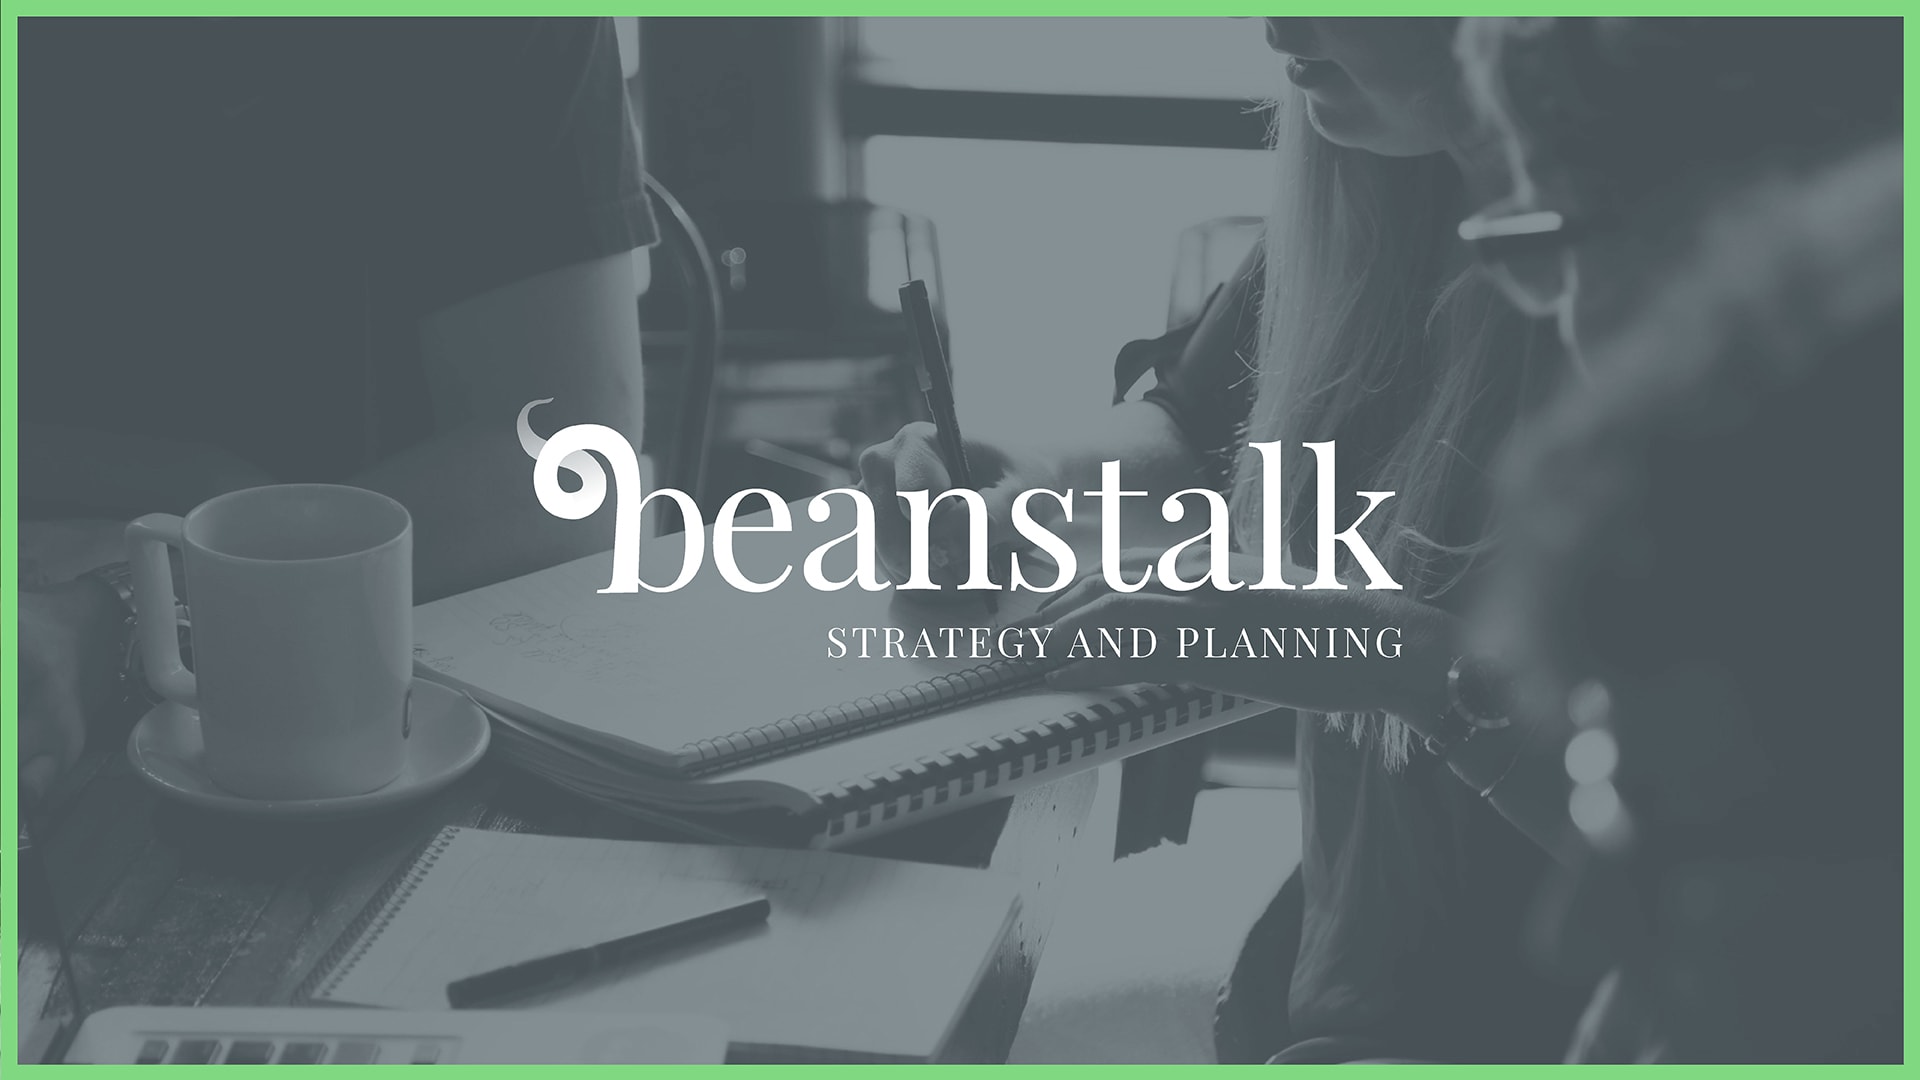 An image of a desktop website homepage hero design for a brand called Beanstalk. The design shows the Beanstalk logo and the words 'strategy and planning' overlaying a photo of a business meeting